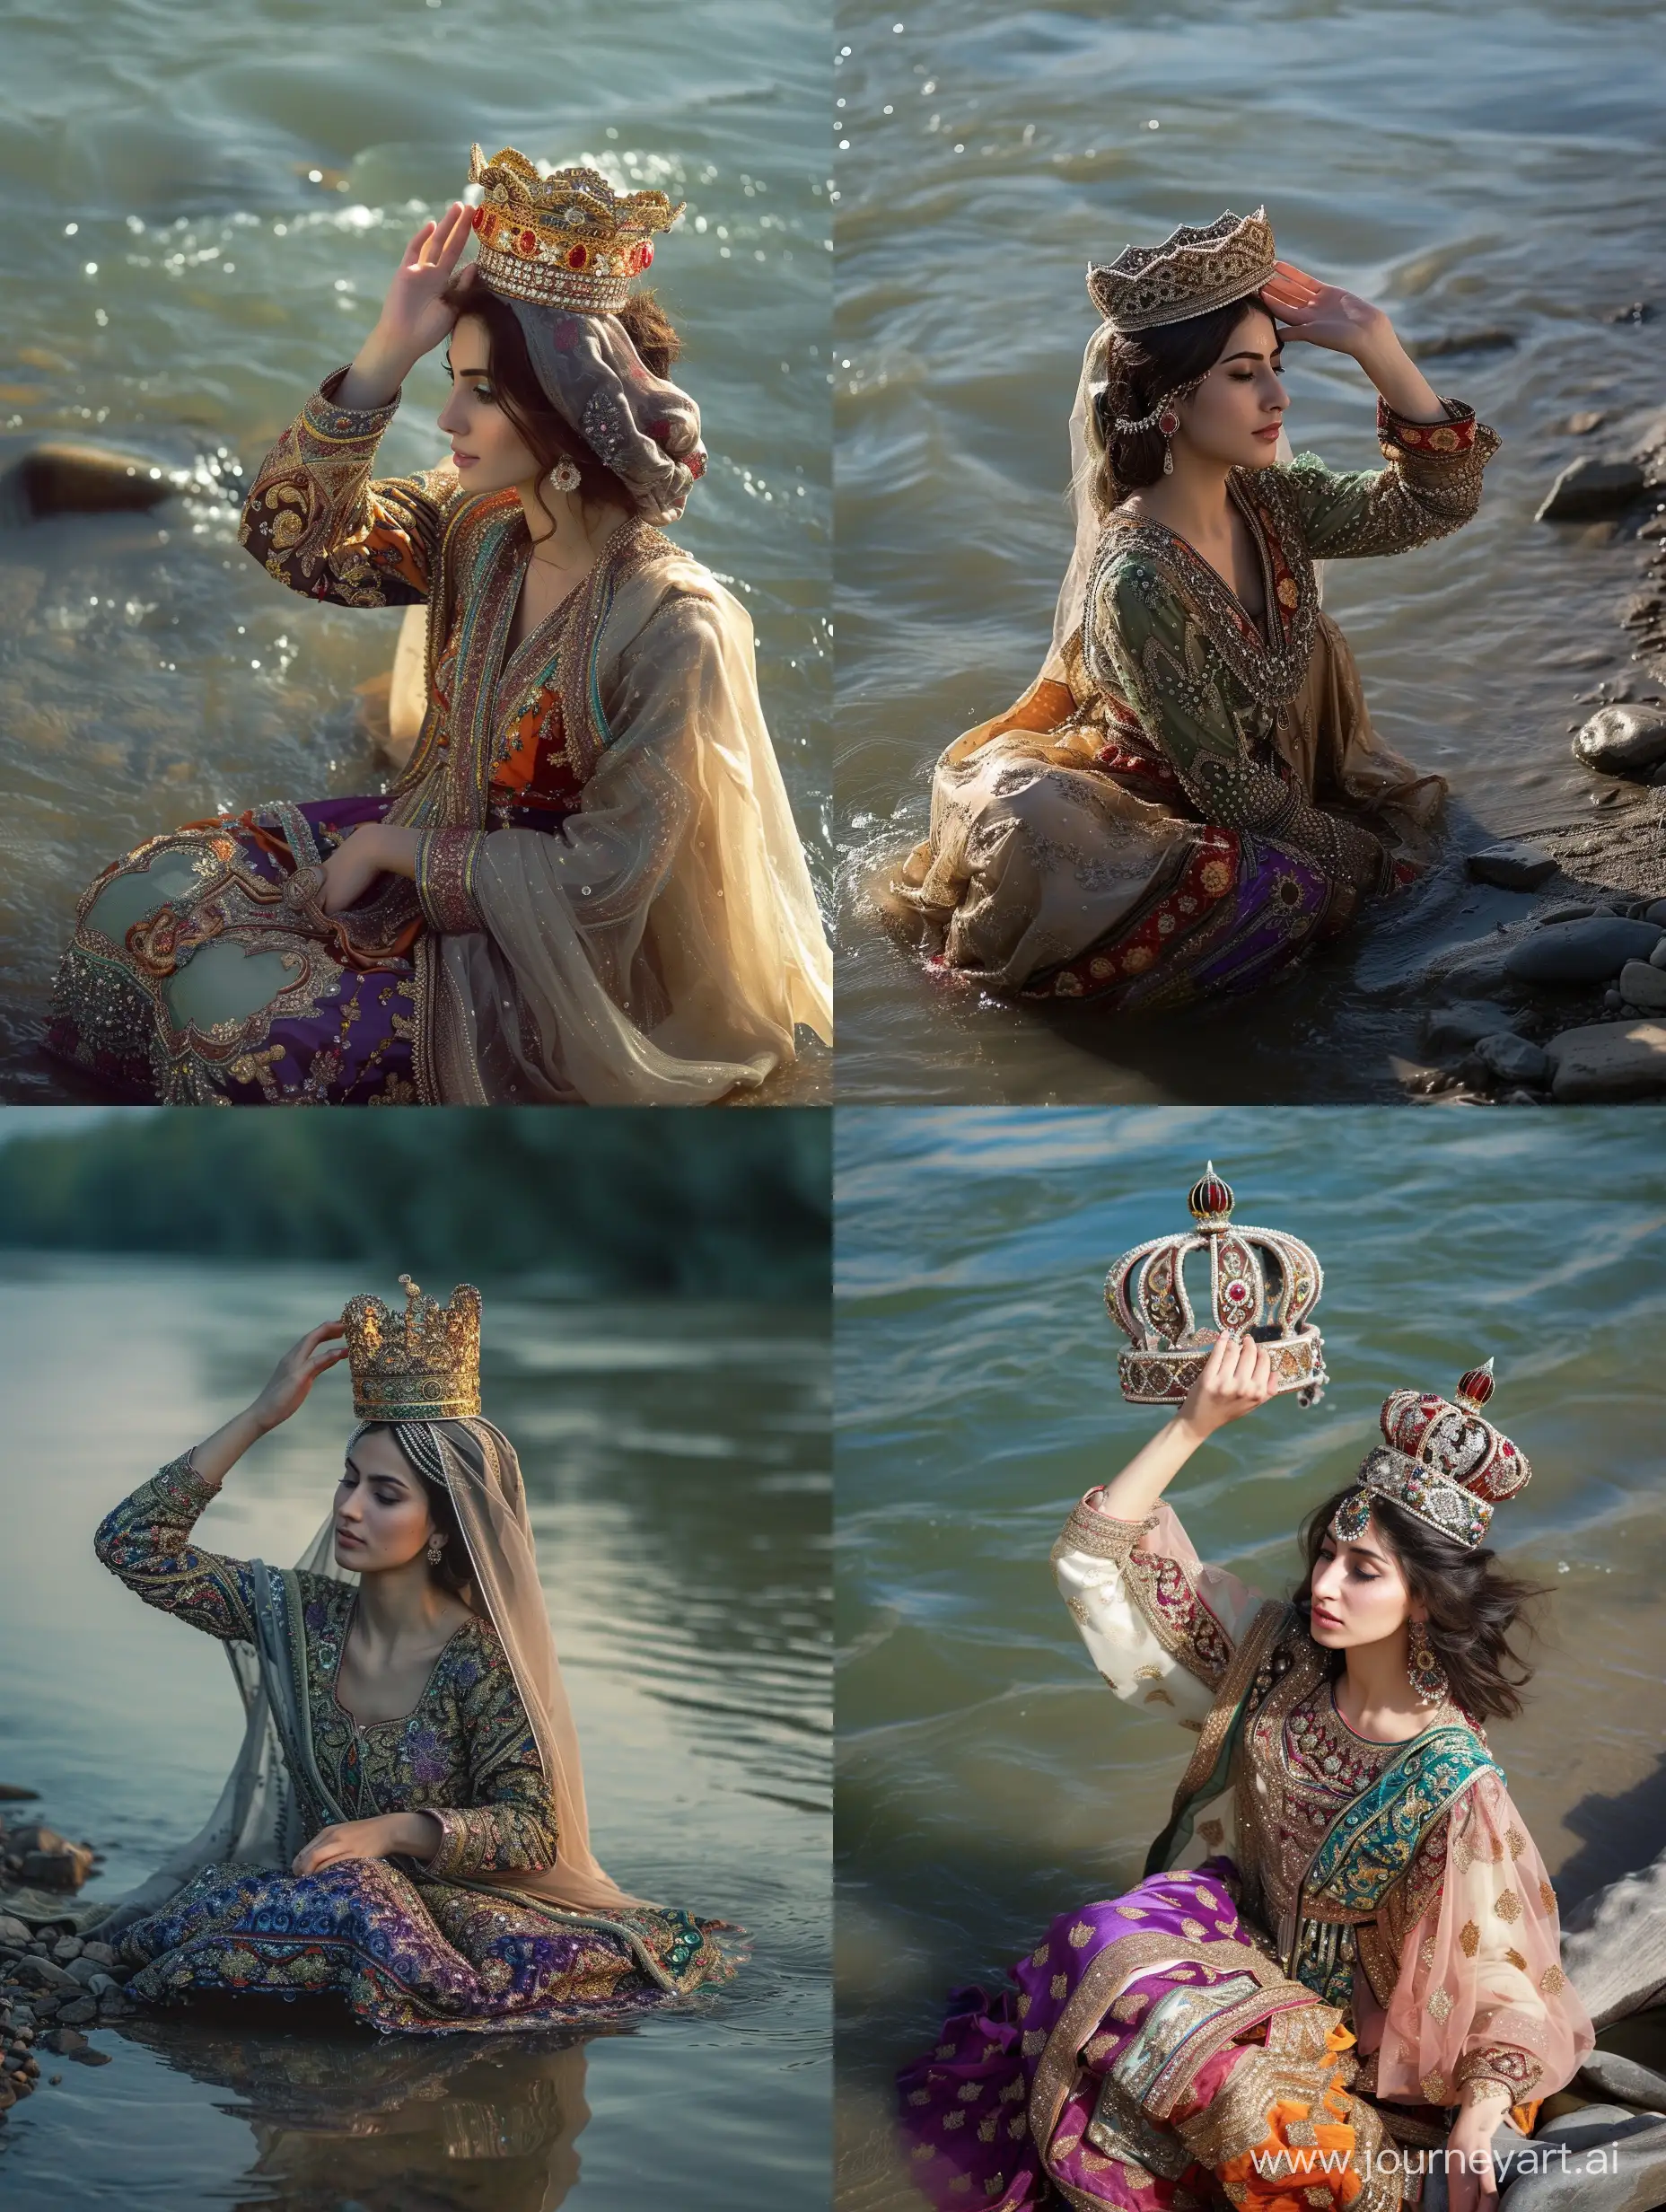 A Persian princess in a traditional Iranian dress and a crown on her head is sitting on the edge of the river and touches the crown with her left hand.